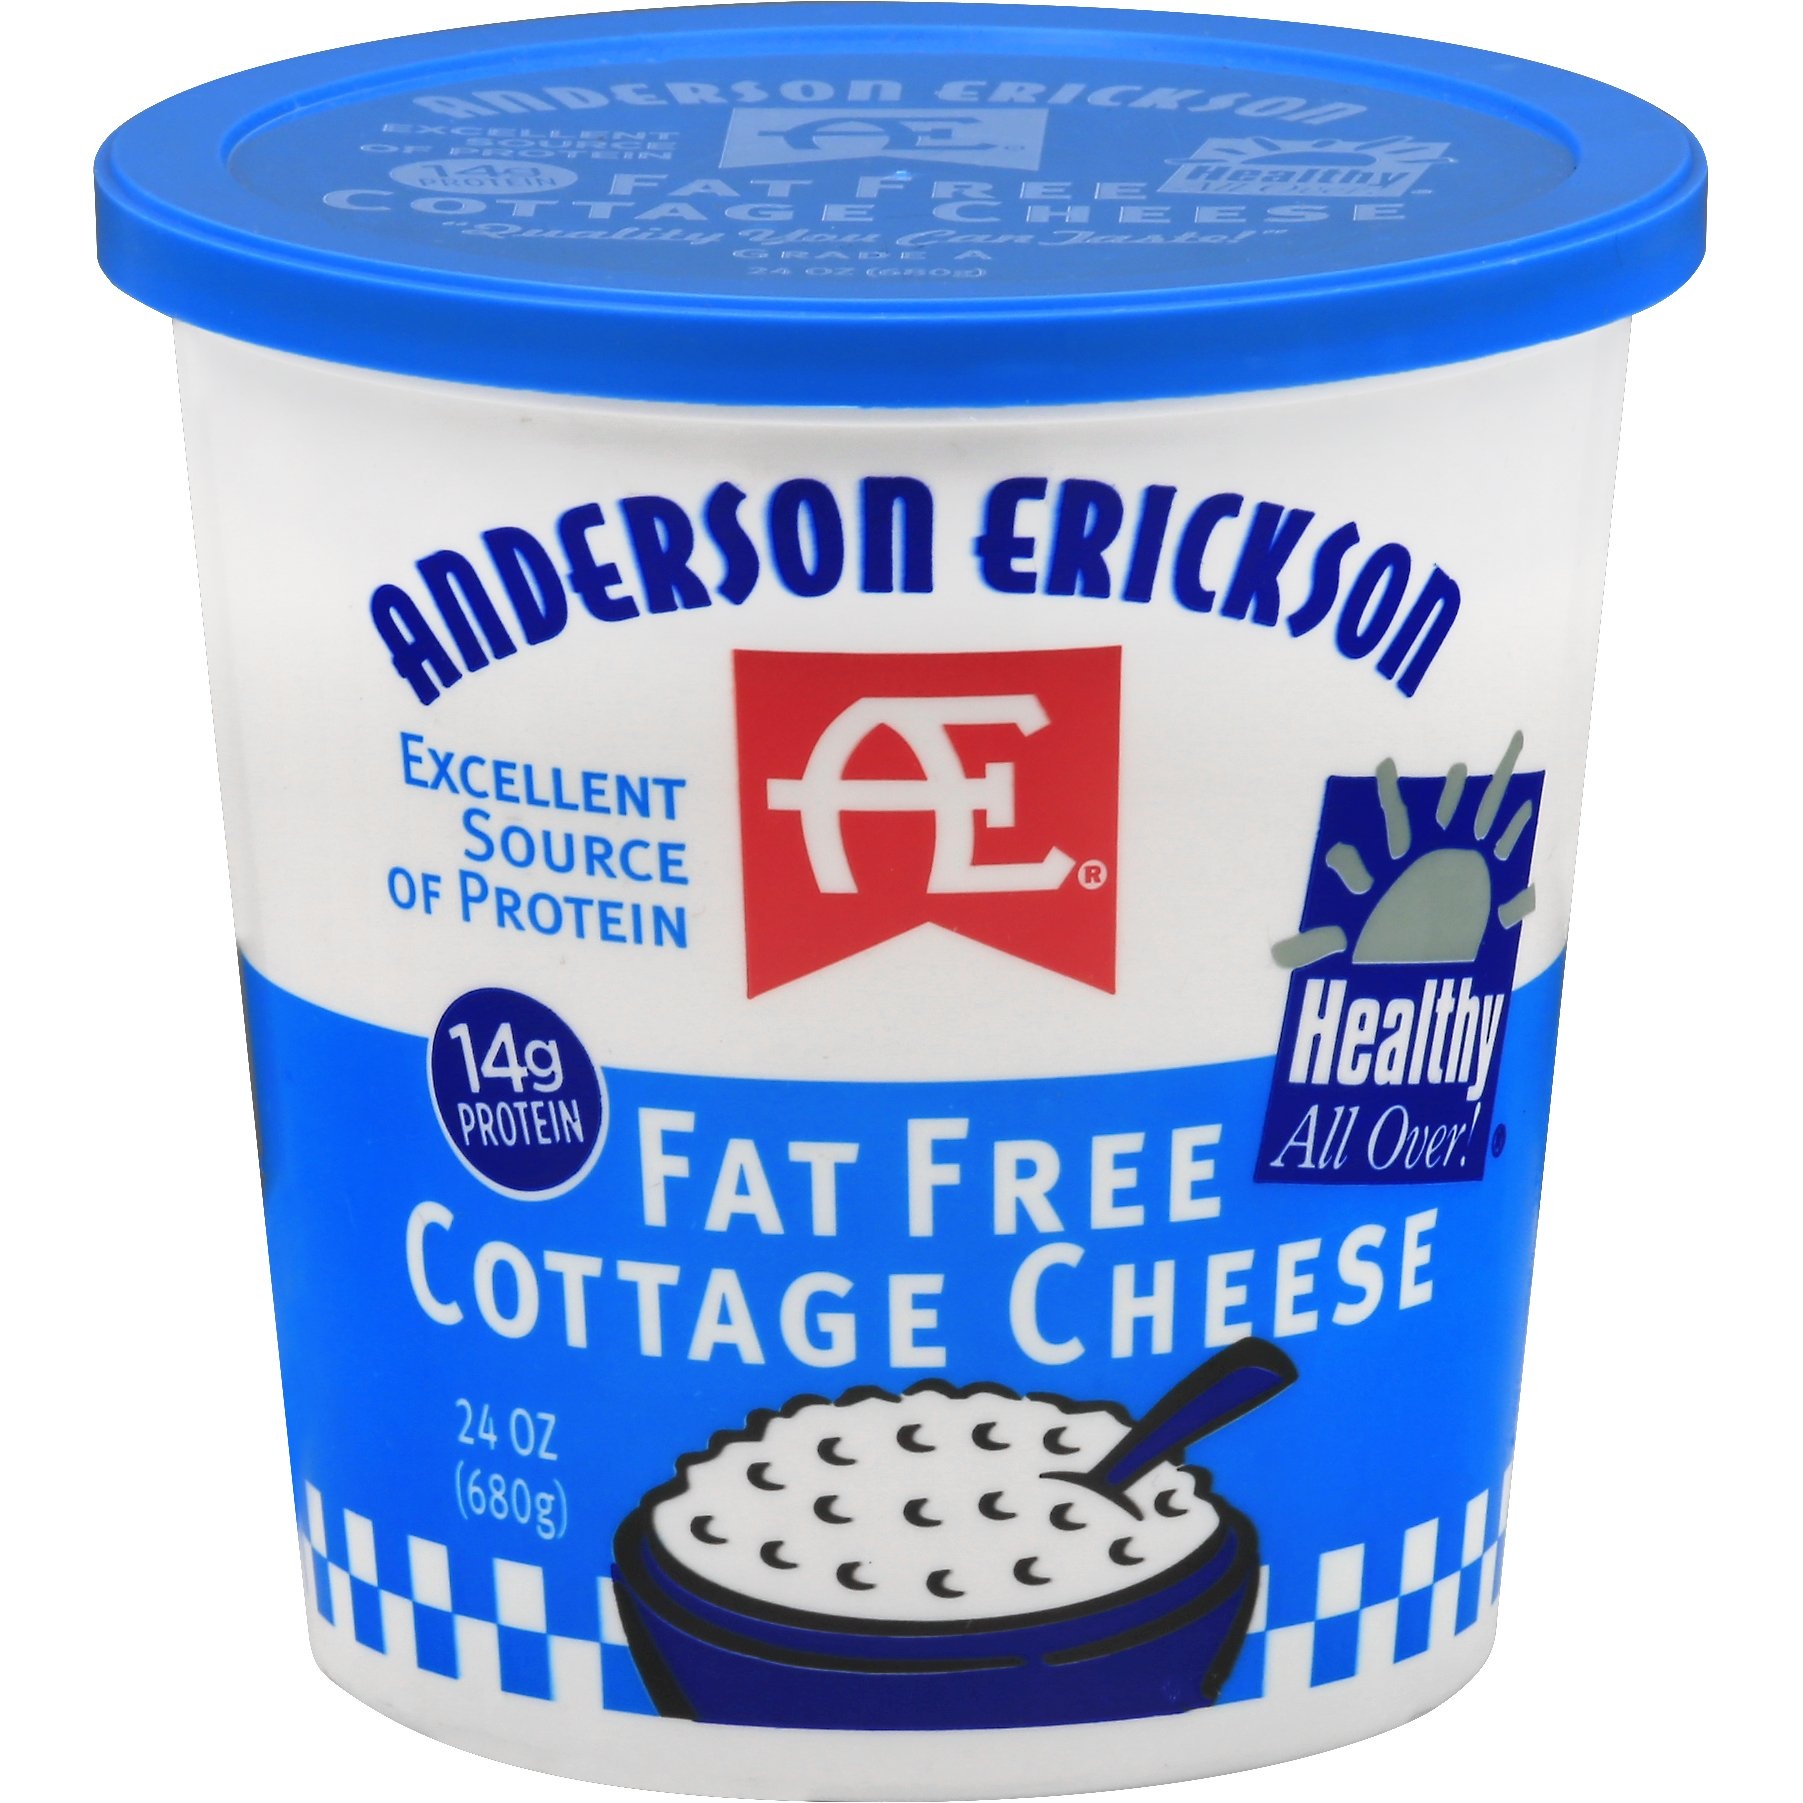 slide 1 of 1, AE Dairy Fat Free Cottage Cheese, 24 oz